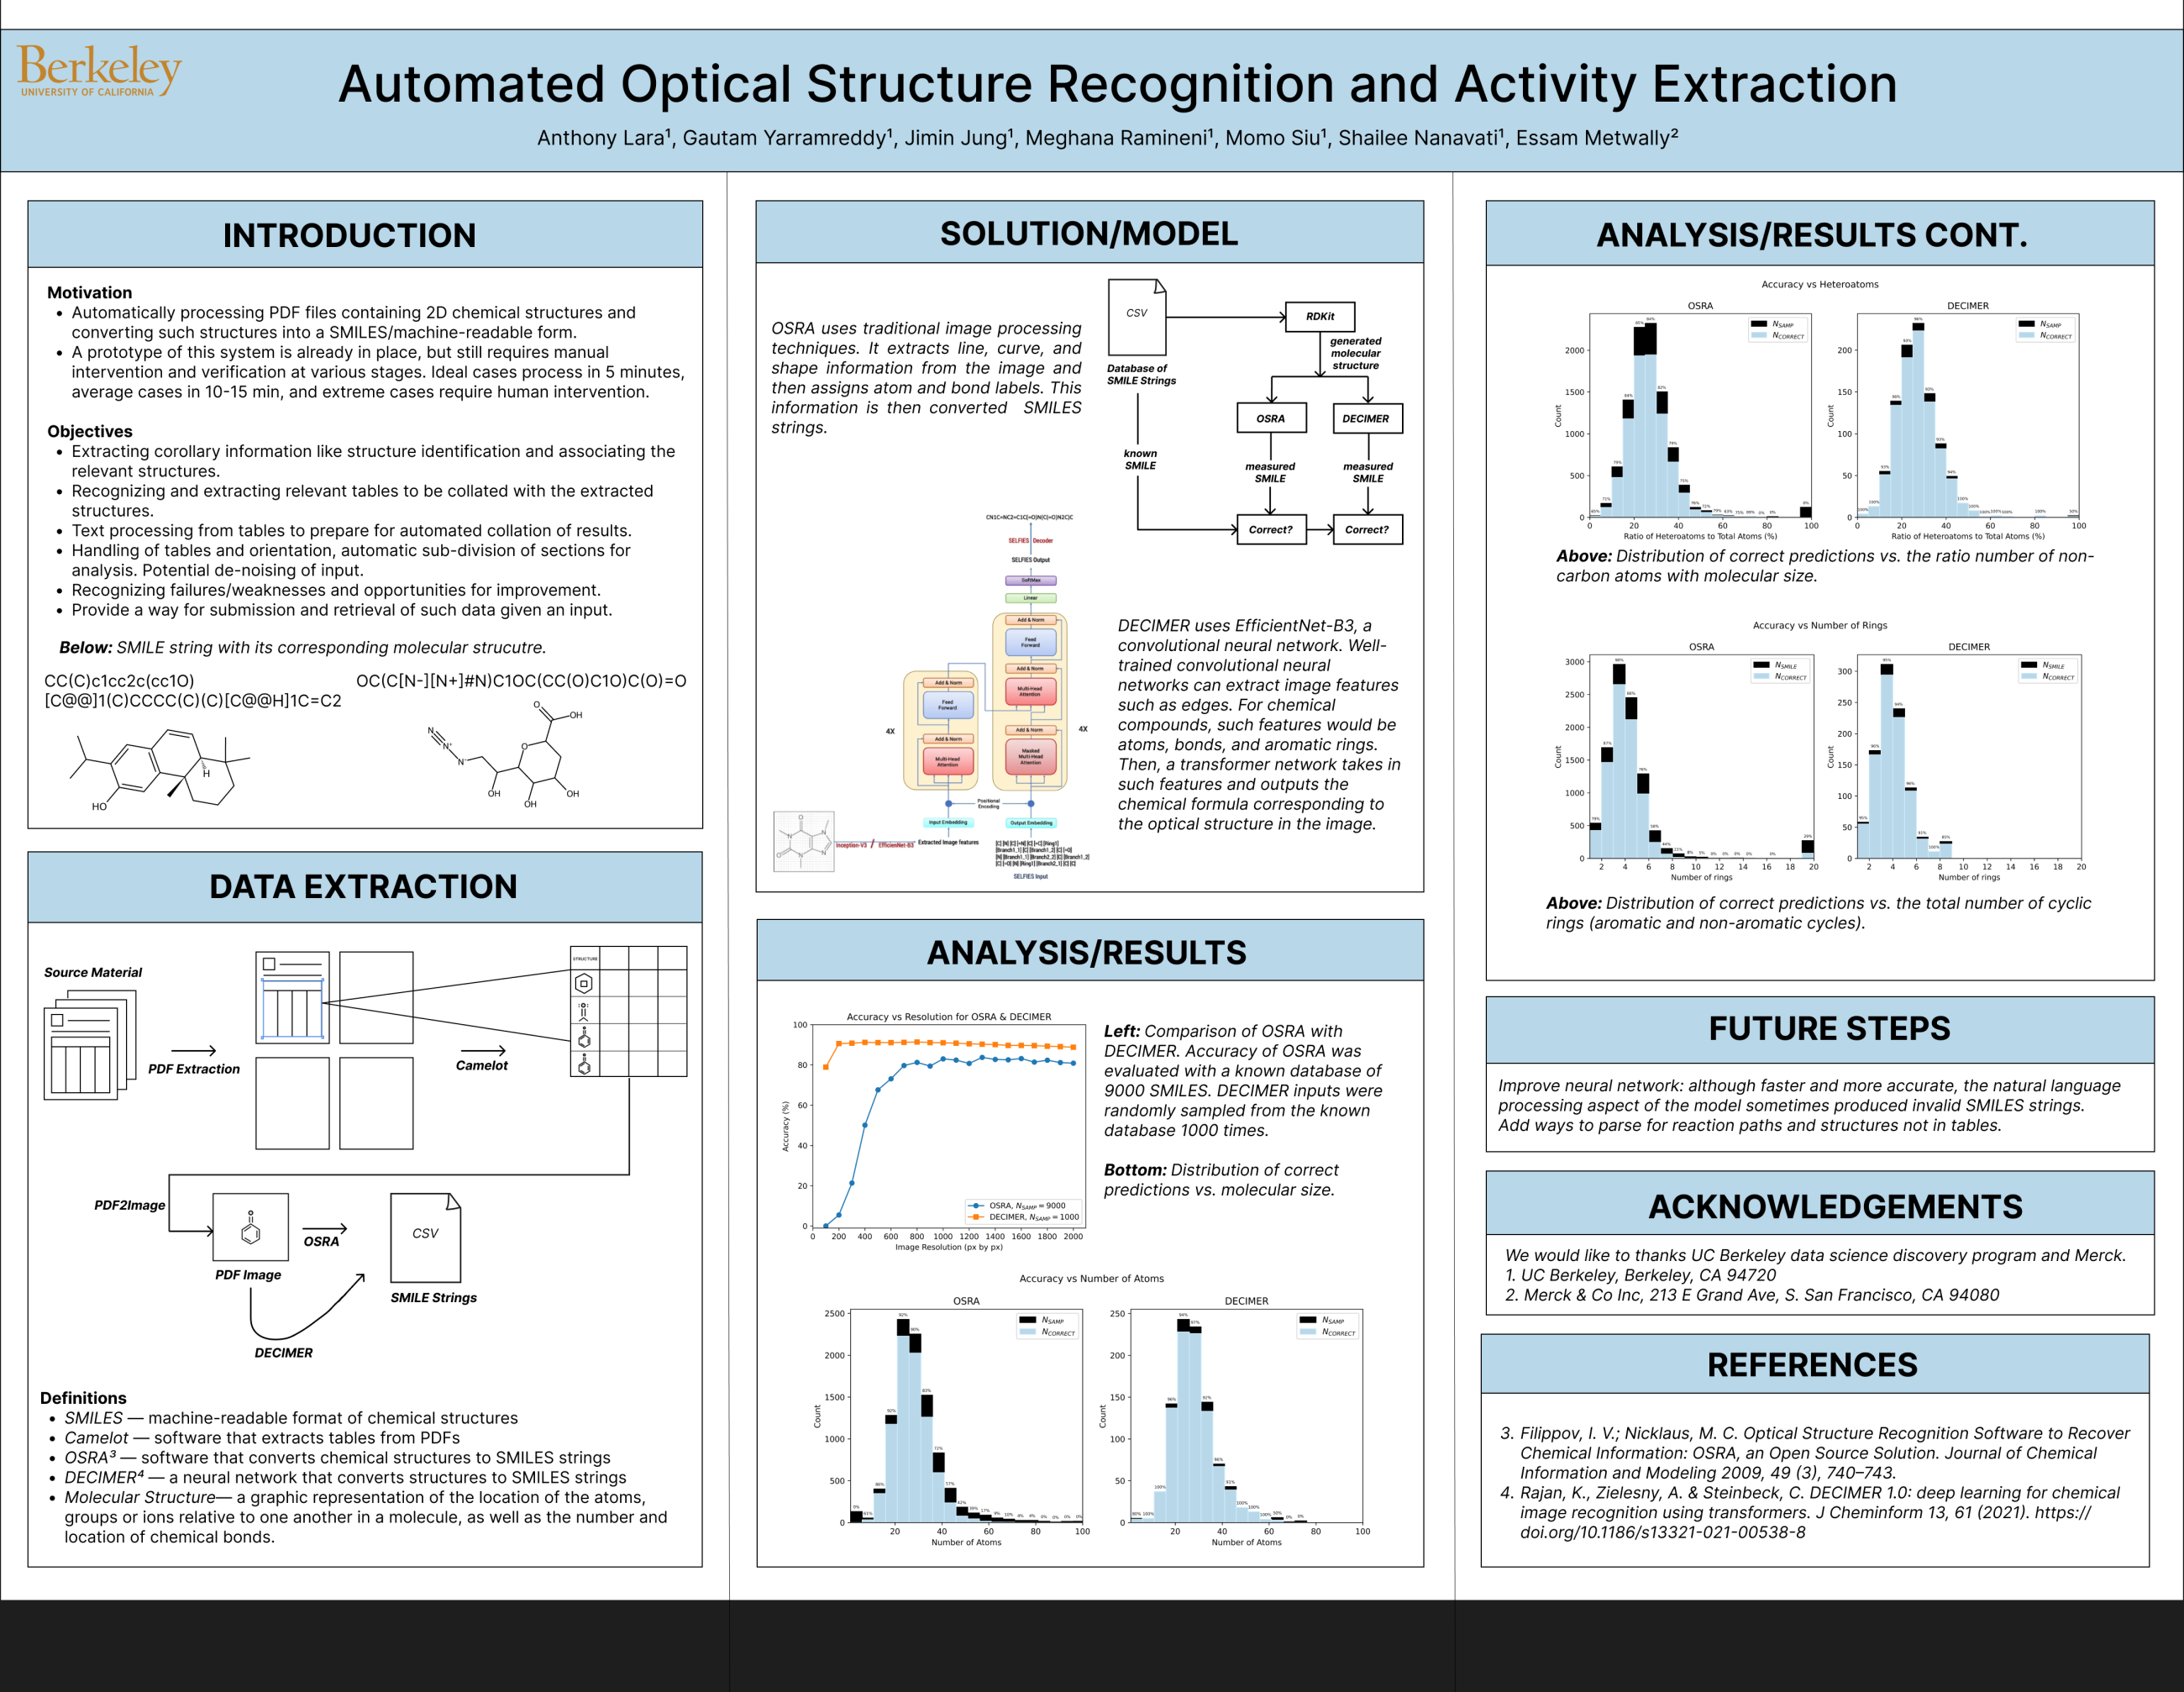 Automated Optical Structure Recognition and Activity Extraction - Spring 2023 Discovery Project